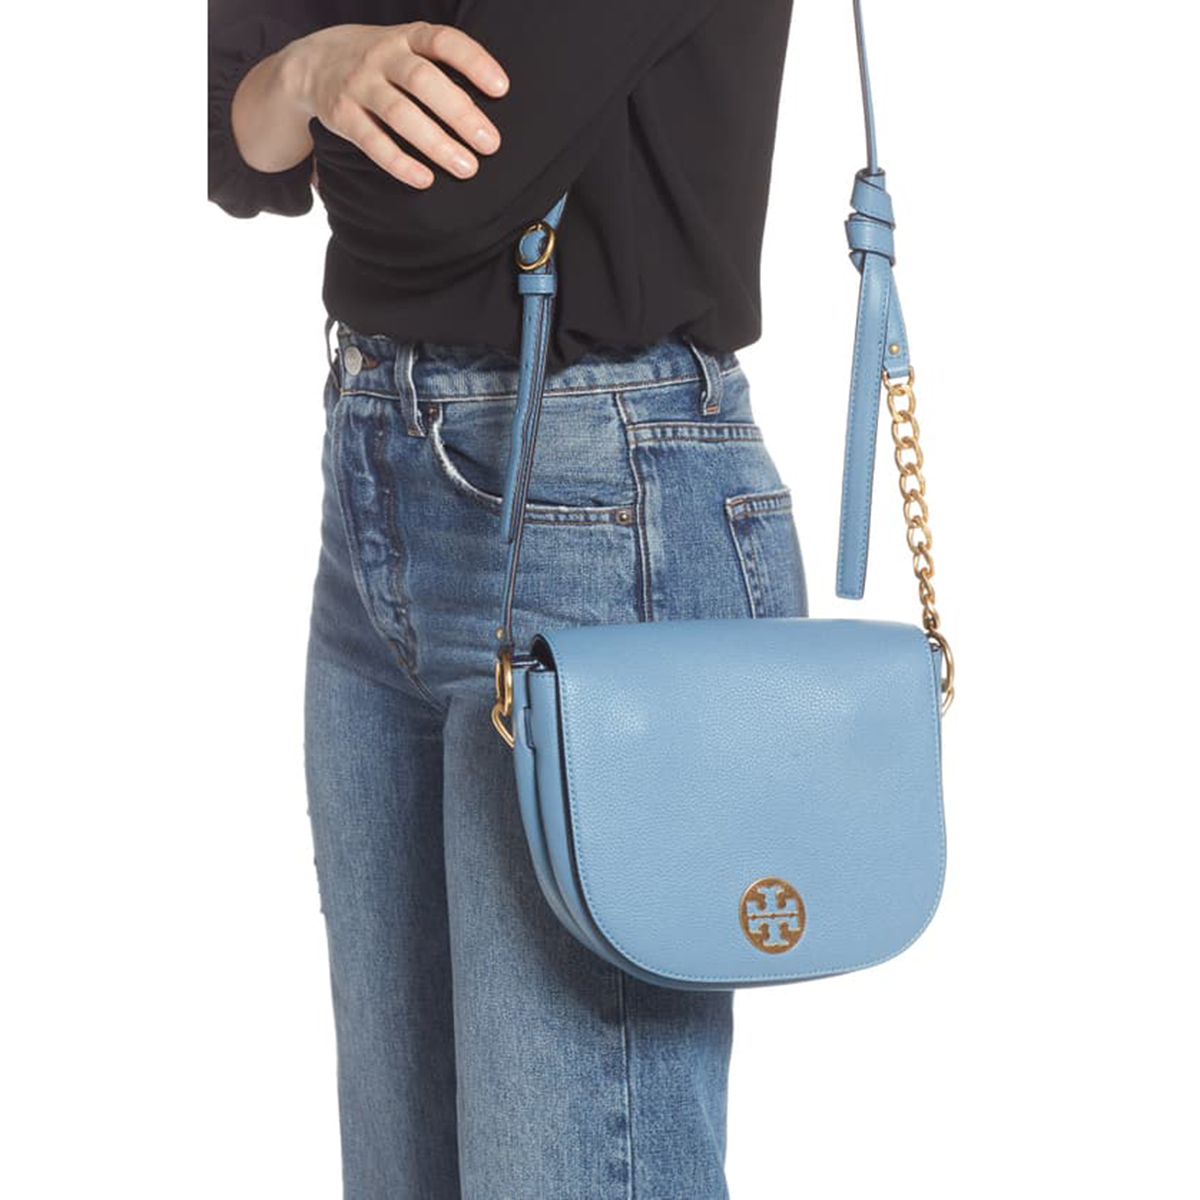 Our Fave Tory Burch Bag Is $150 Off in the Nordstrom Anniversary Sale